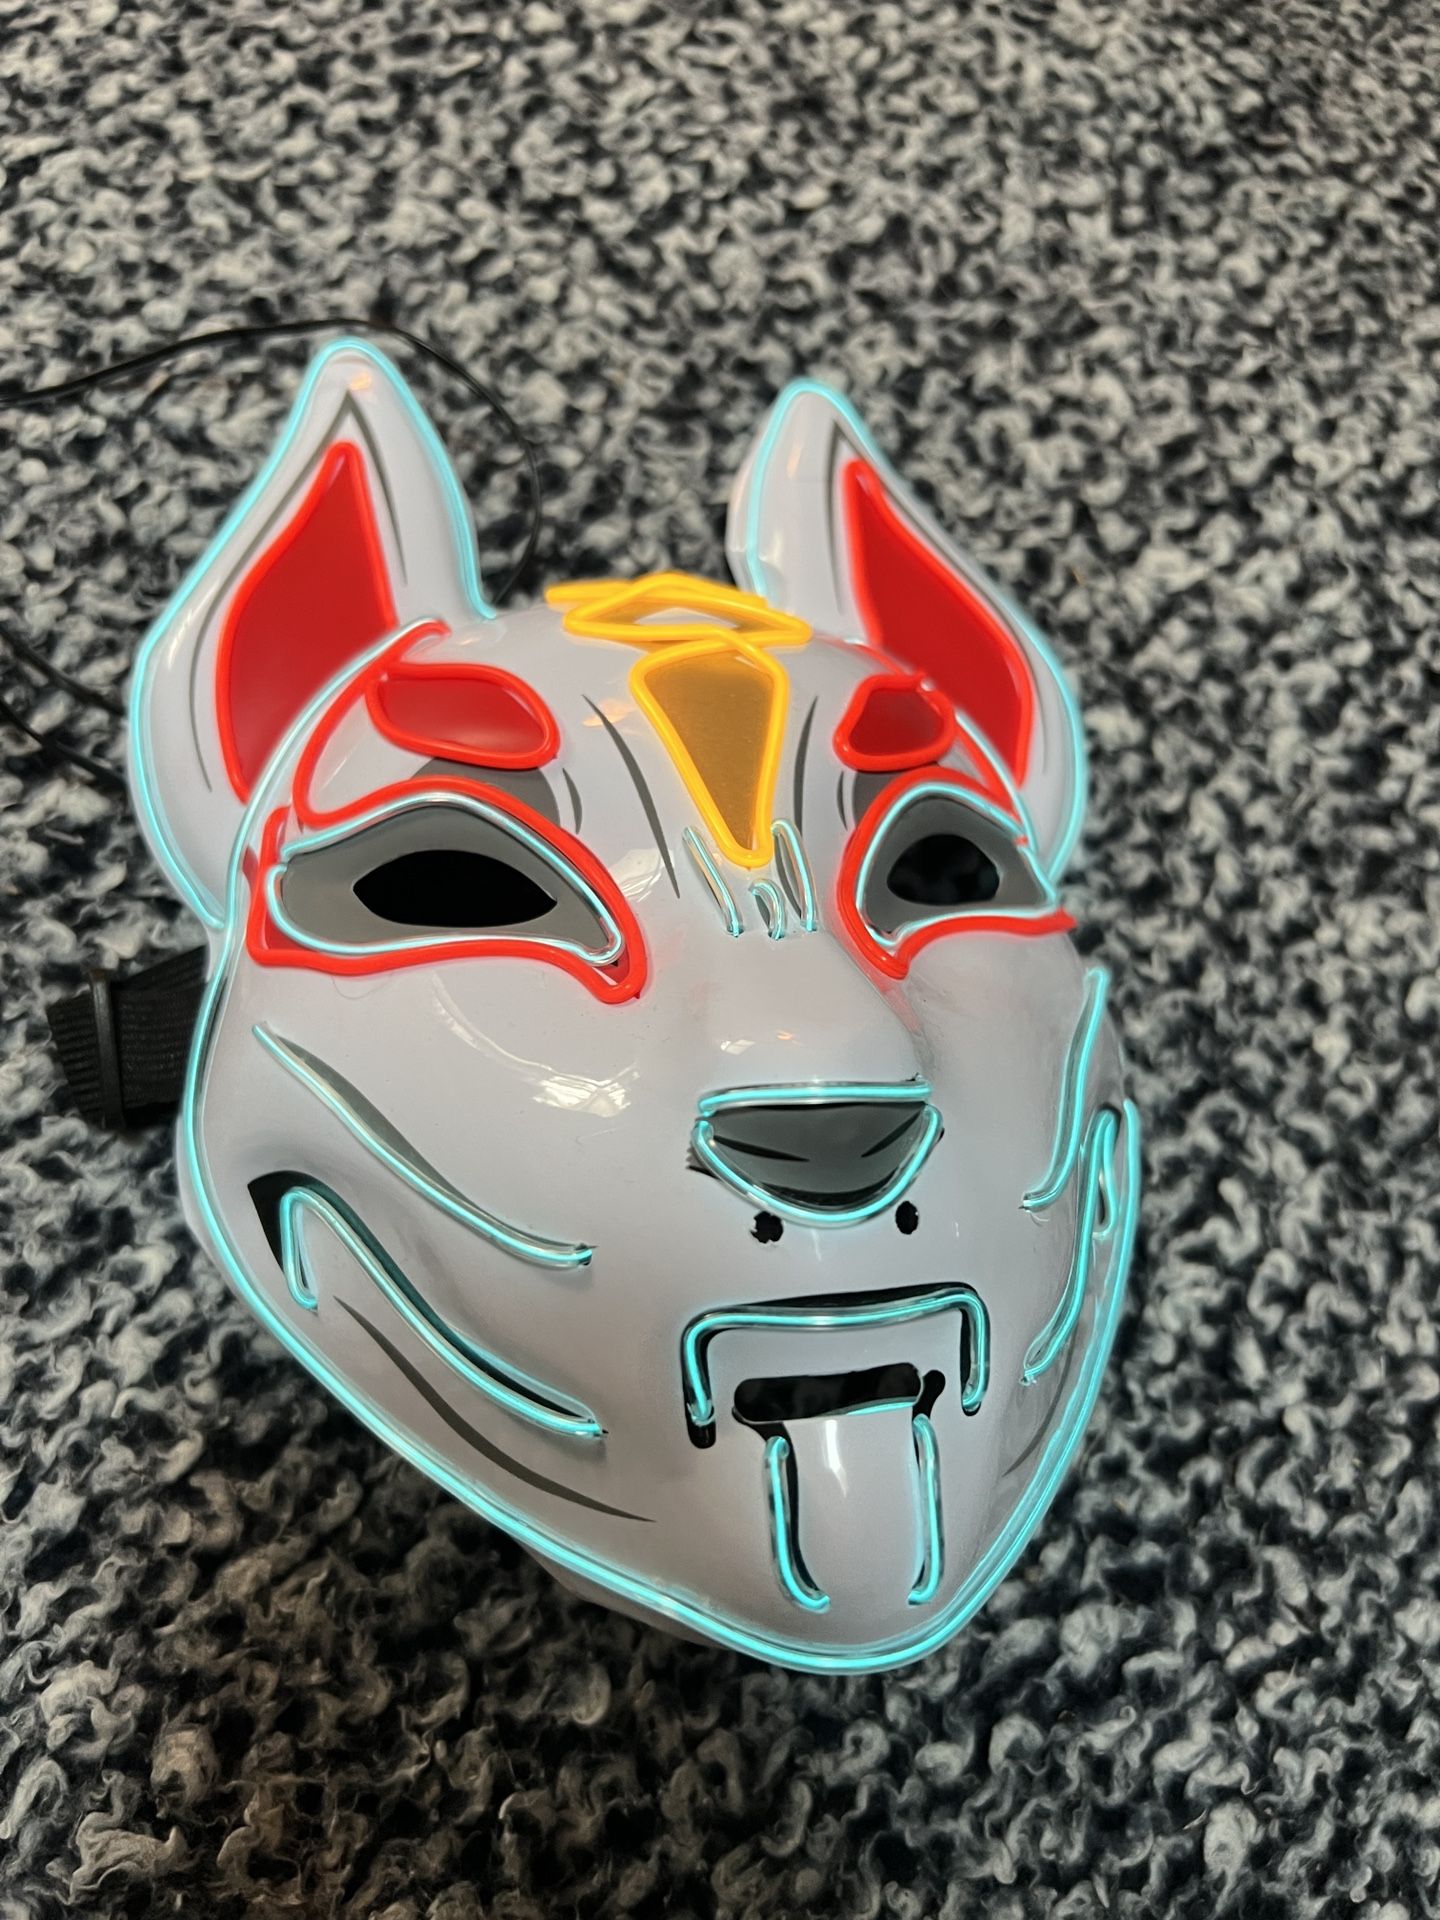 Glowing Halloween Mask (Fornite Drift Cat) Light Up Mask (Battery Operated)